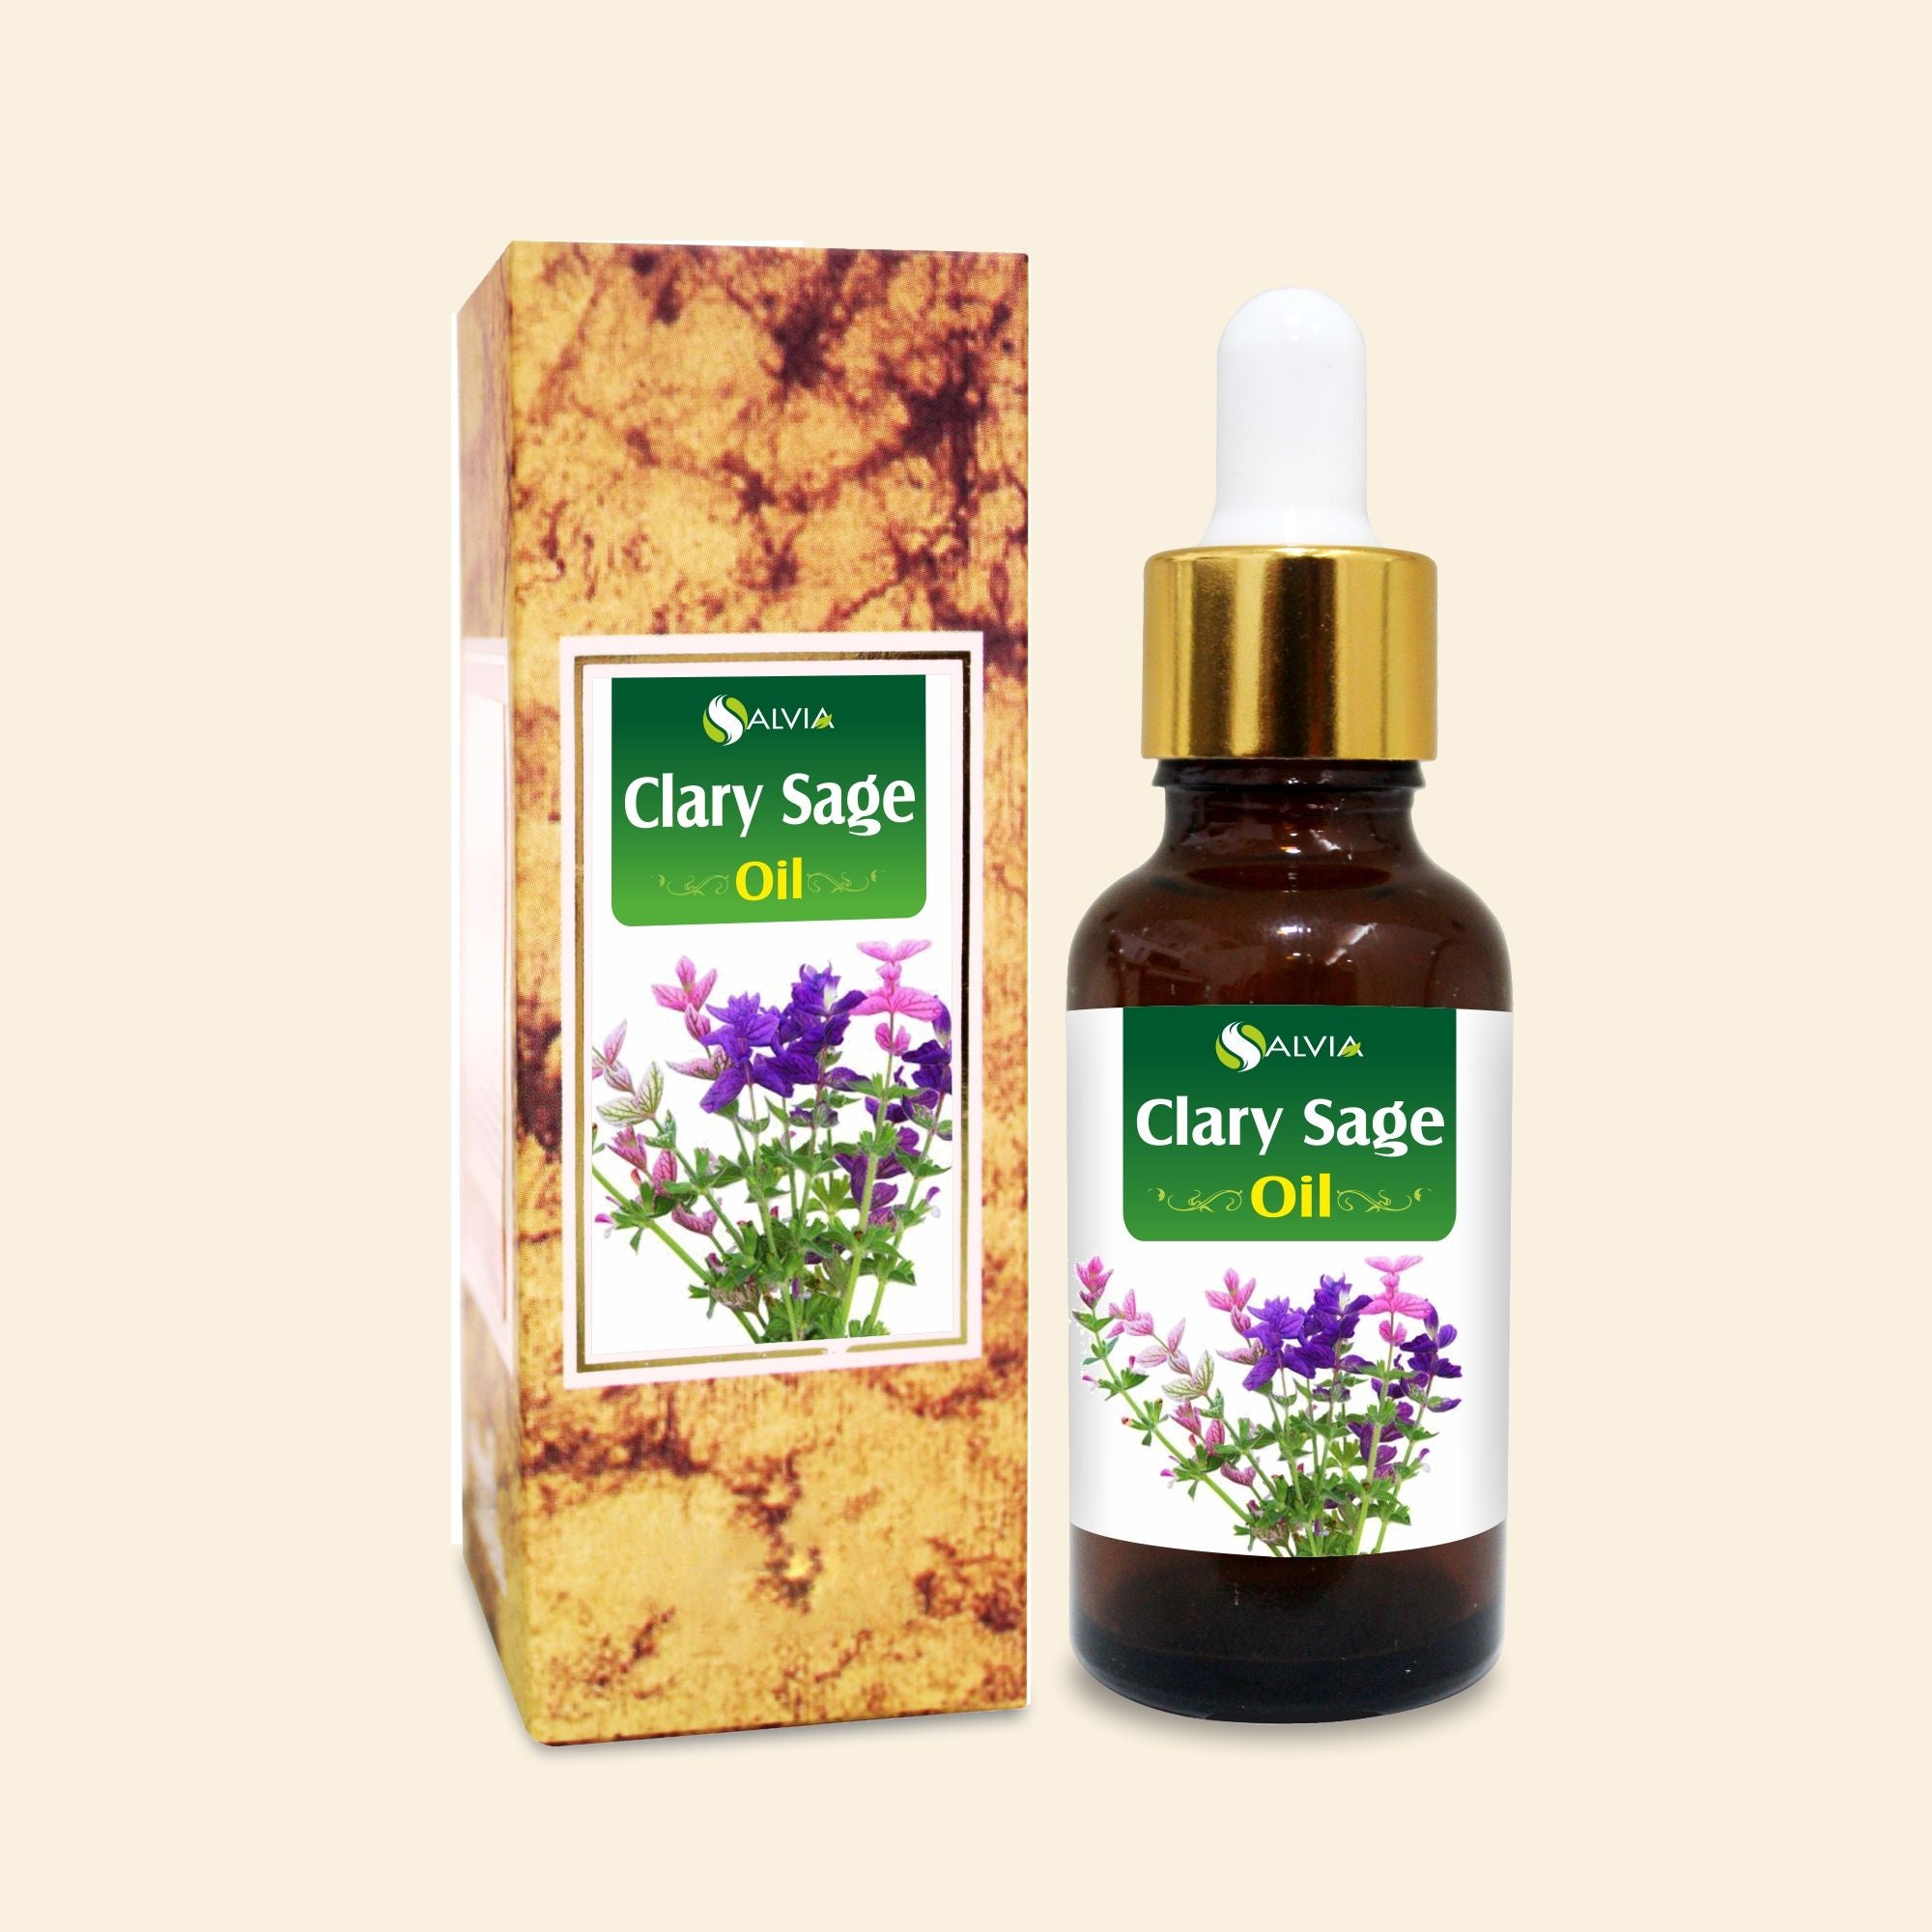 Salvia Natural Essential Oils,Greasy Oil,Acne,Anti-acne Oil,Oil for Greasy hair,Best Essential Oils for Hair Clary Sage Oil